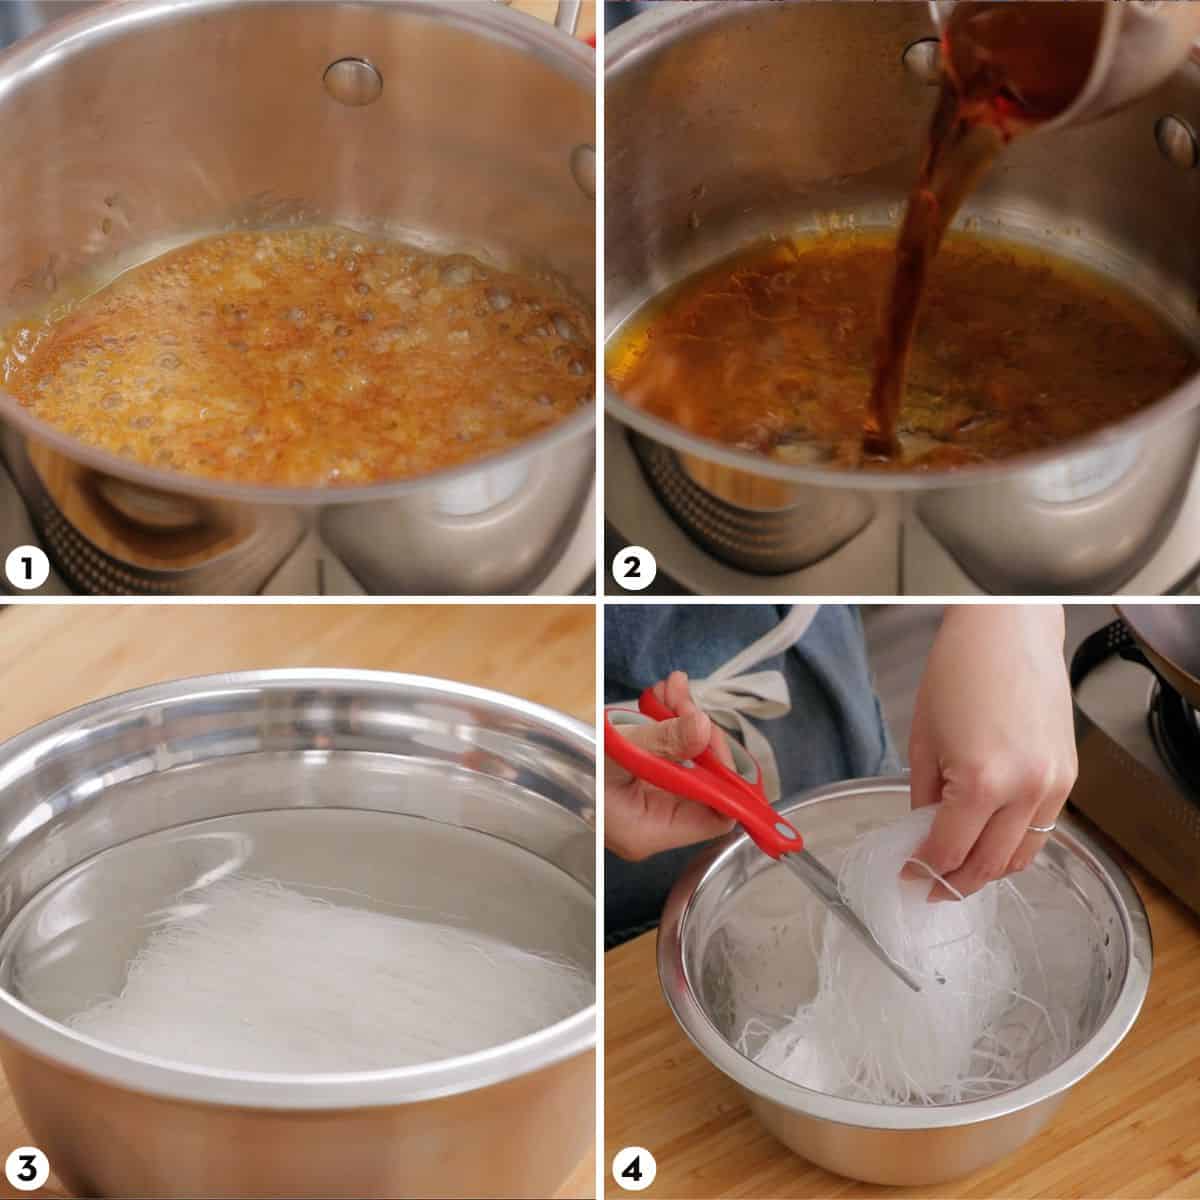 Process shots for making pad thai with glass noodles steps 1-4